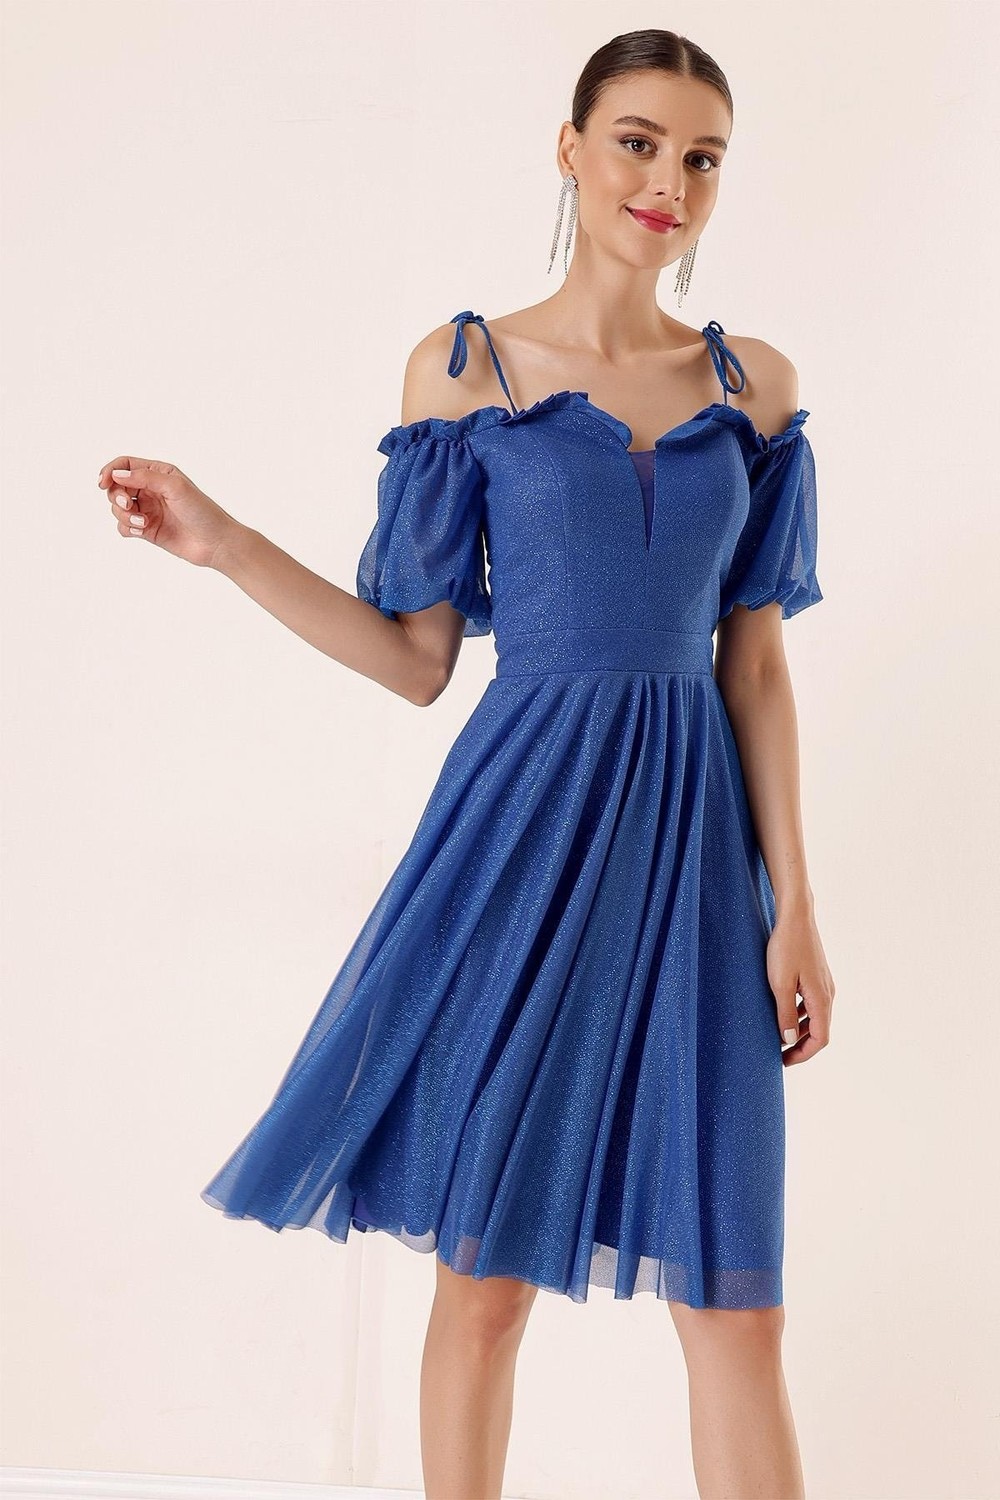 By Saygı Pleated Collar with Balloon Sleeves and Lined Glittery Tulle Dress Saks